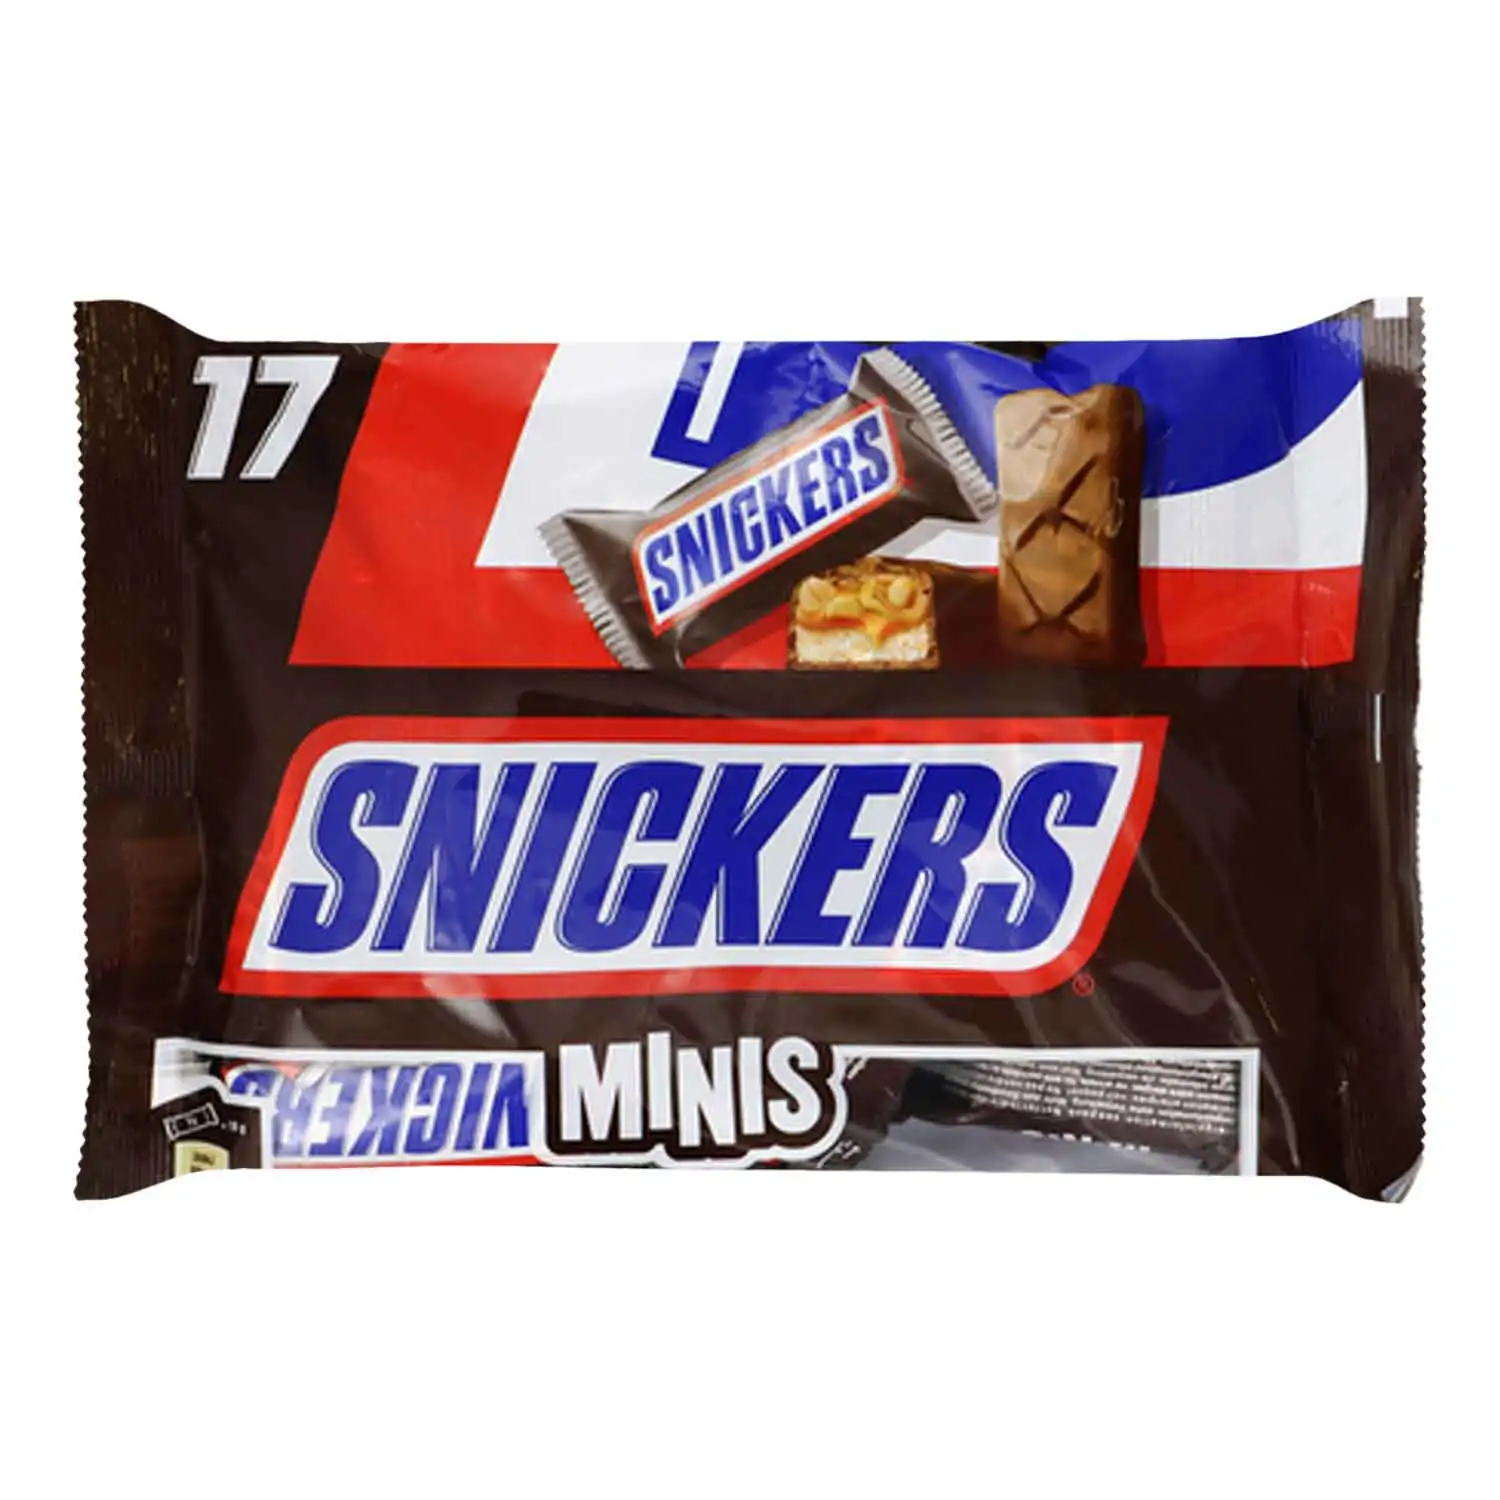 Snickers minis 333g